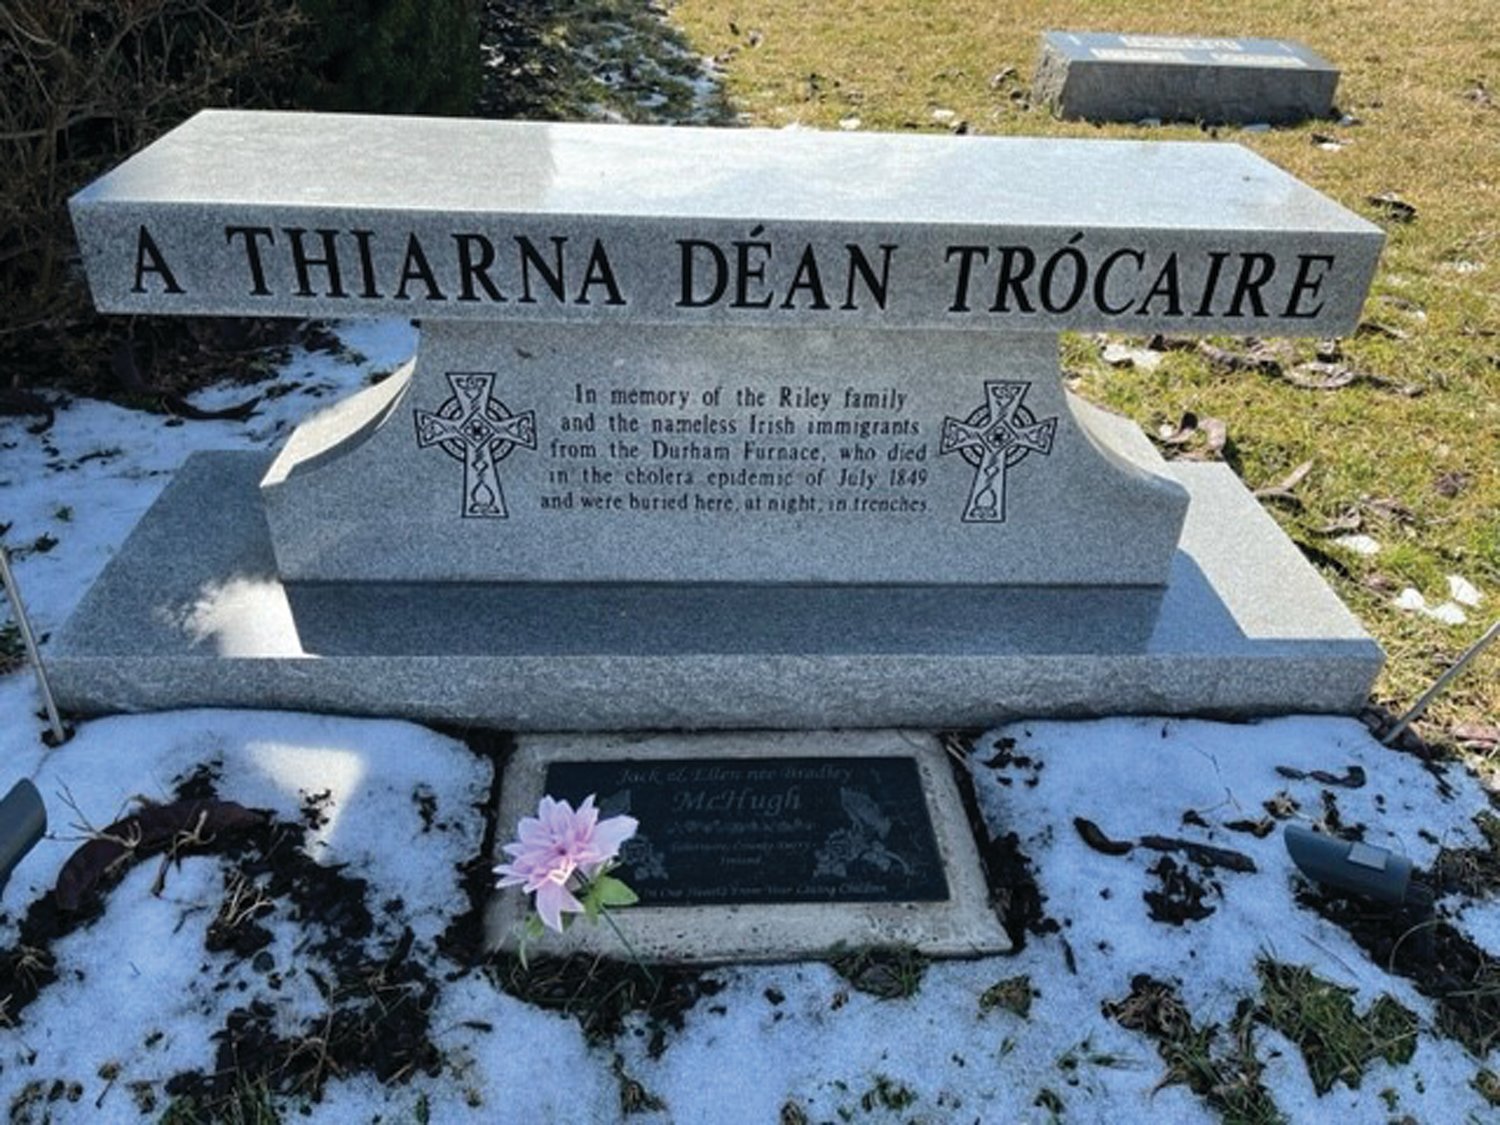 A granite memorial stone at Old St. John’s Roman Catholic Cemetery in Haycock calls to mind the tragic deaths of unknown Irish immigrants during a 19th Century pandemic.